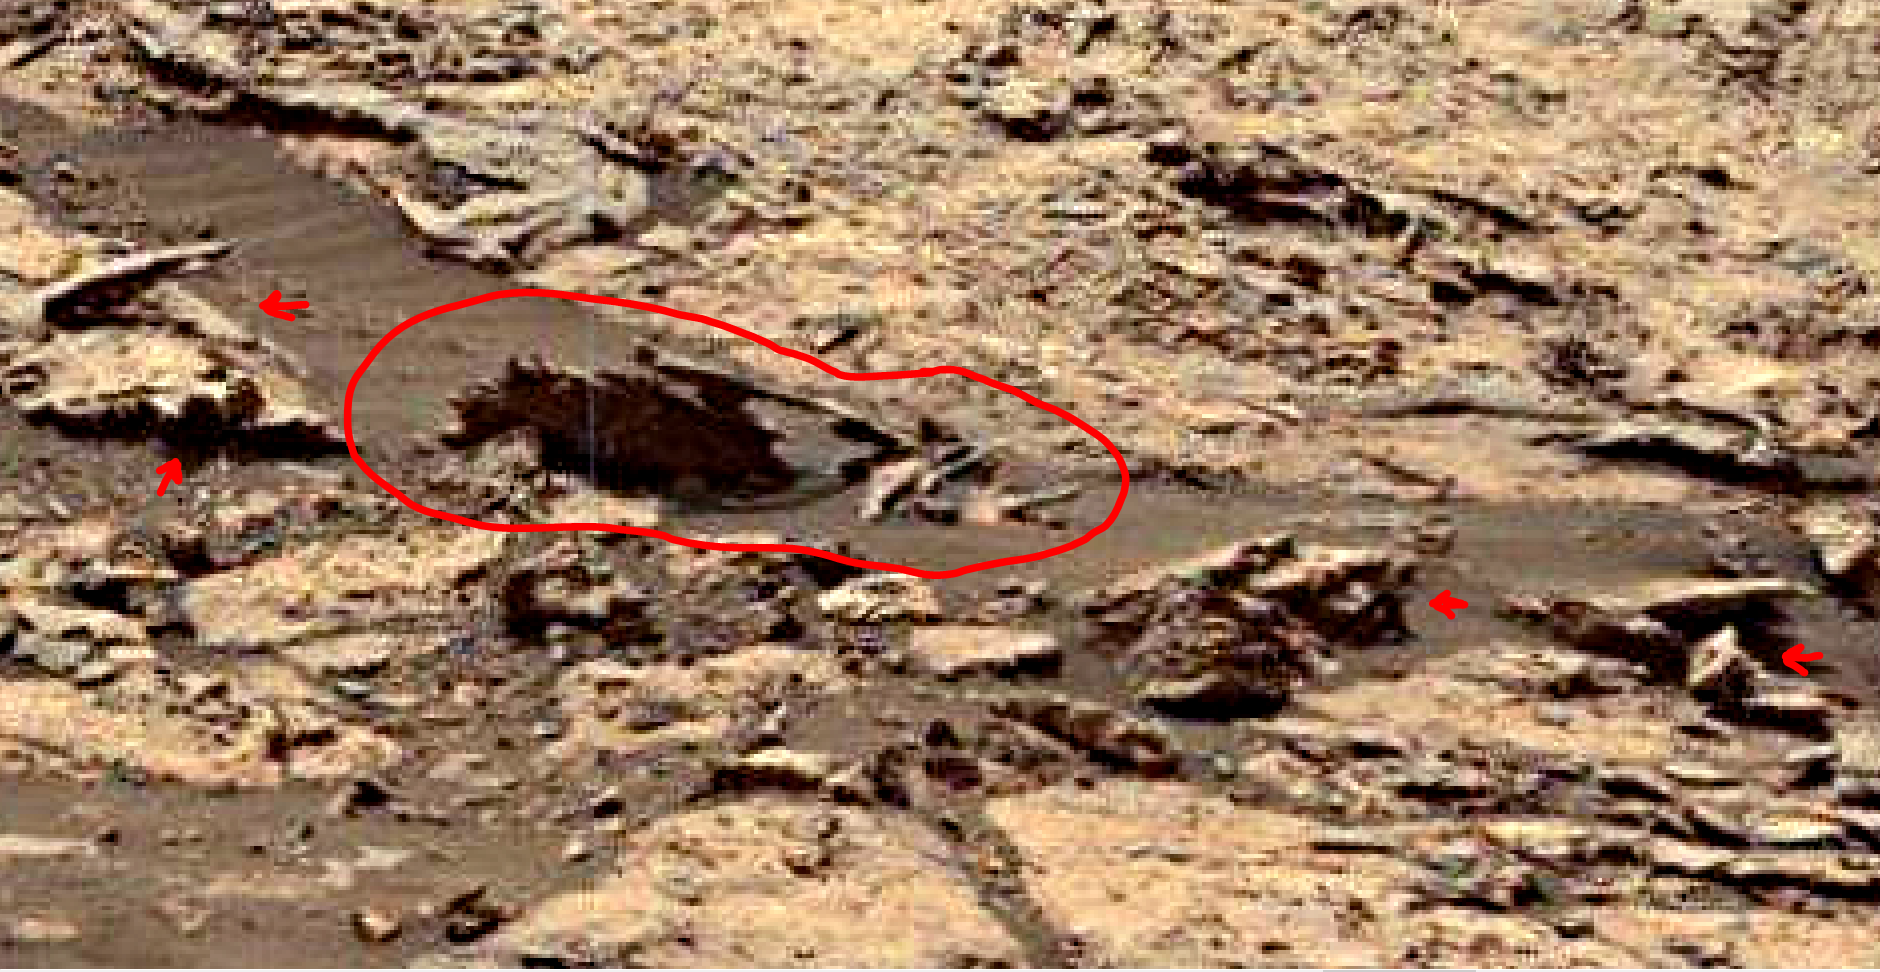 mars-sol-1485-anomaly-artifacts-15-was-life-on-mars